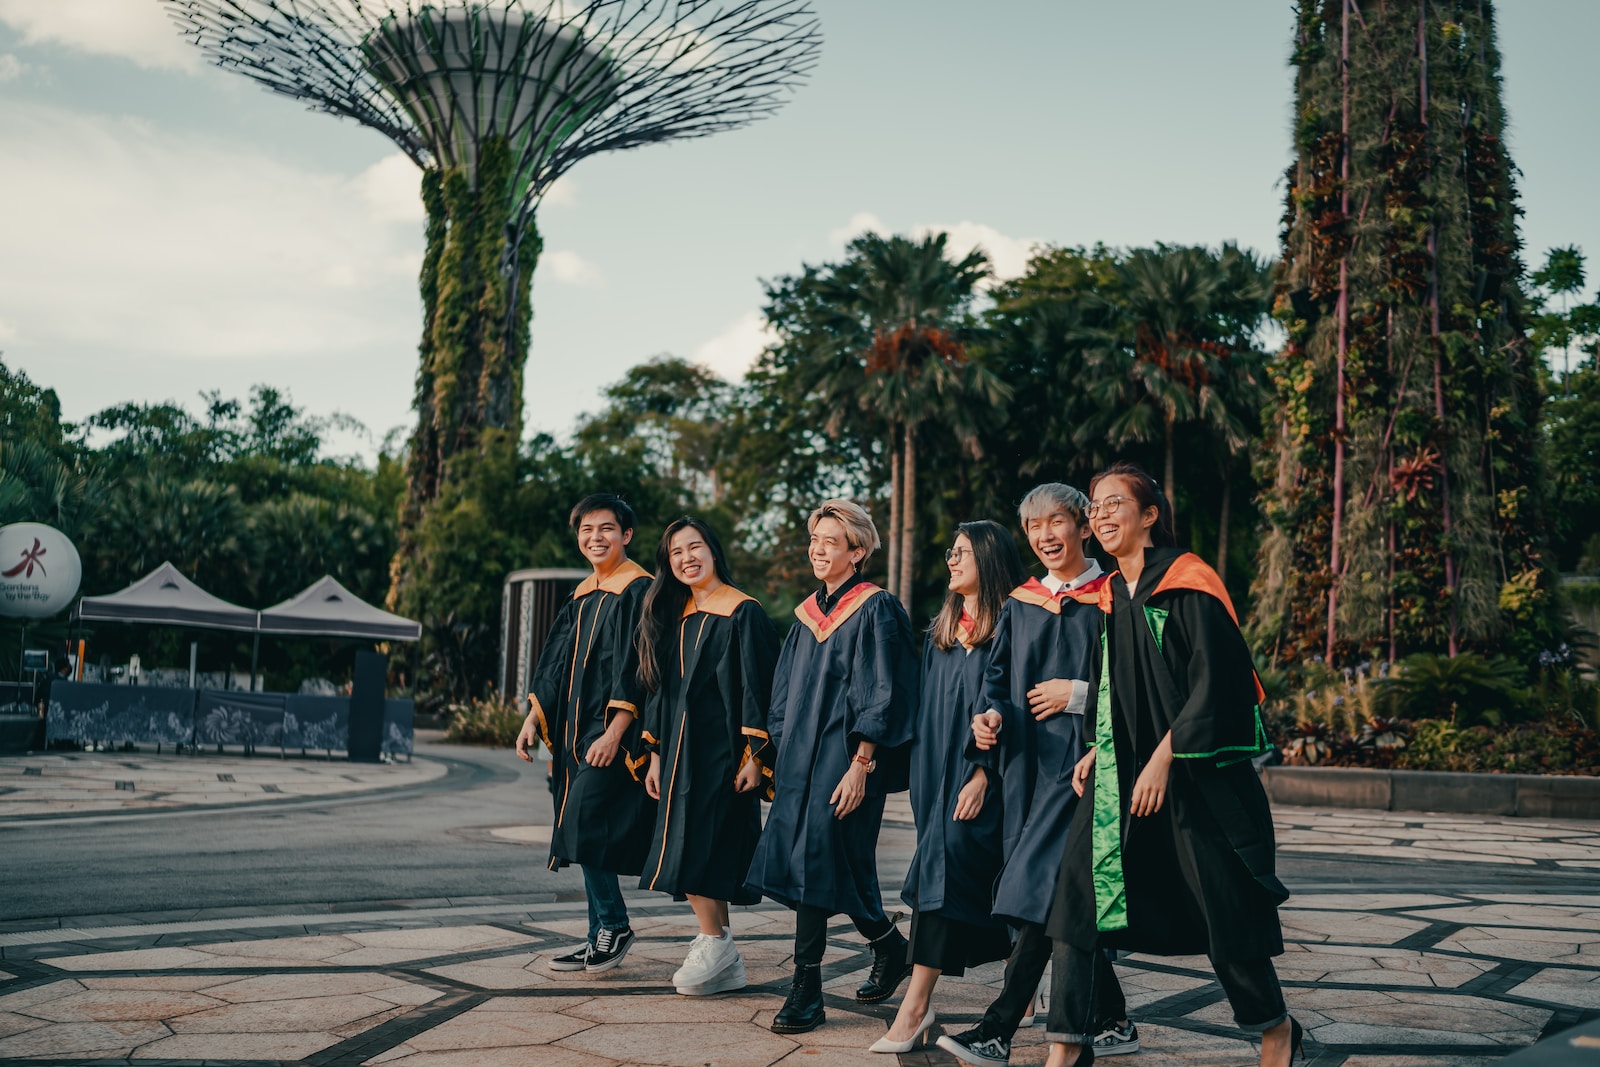 group of people in black academic dress standing on gray concrete pavement during daytime